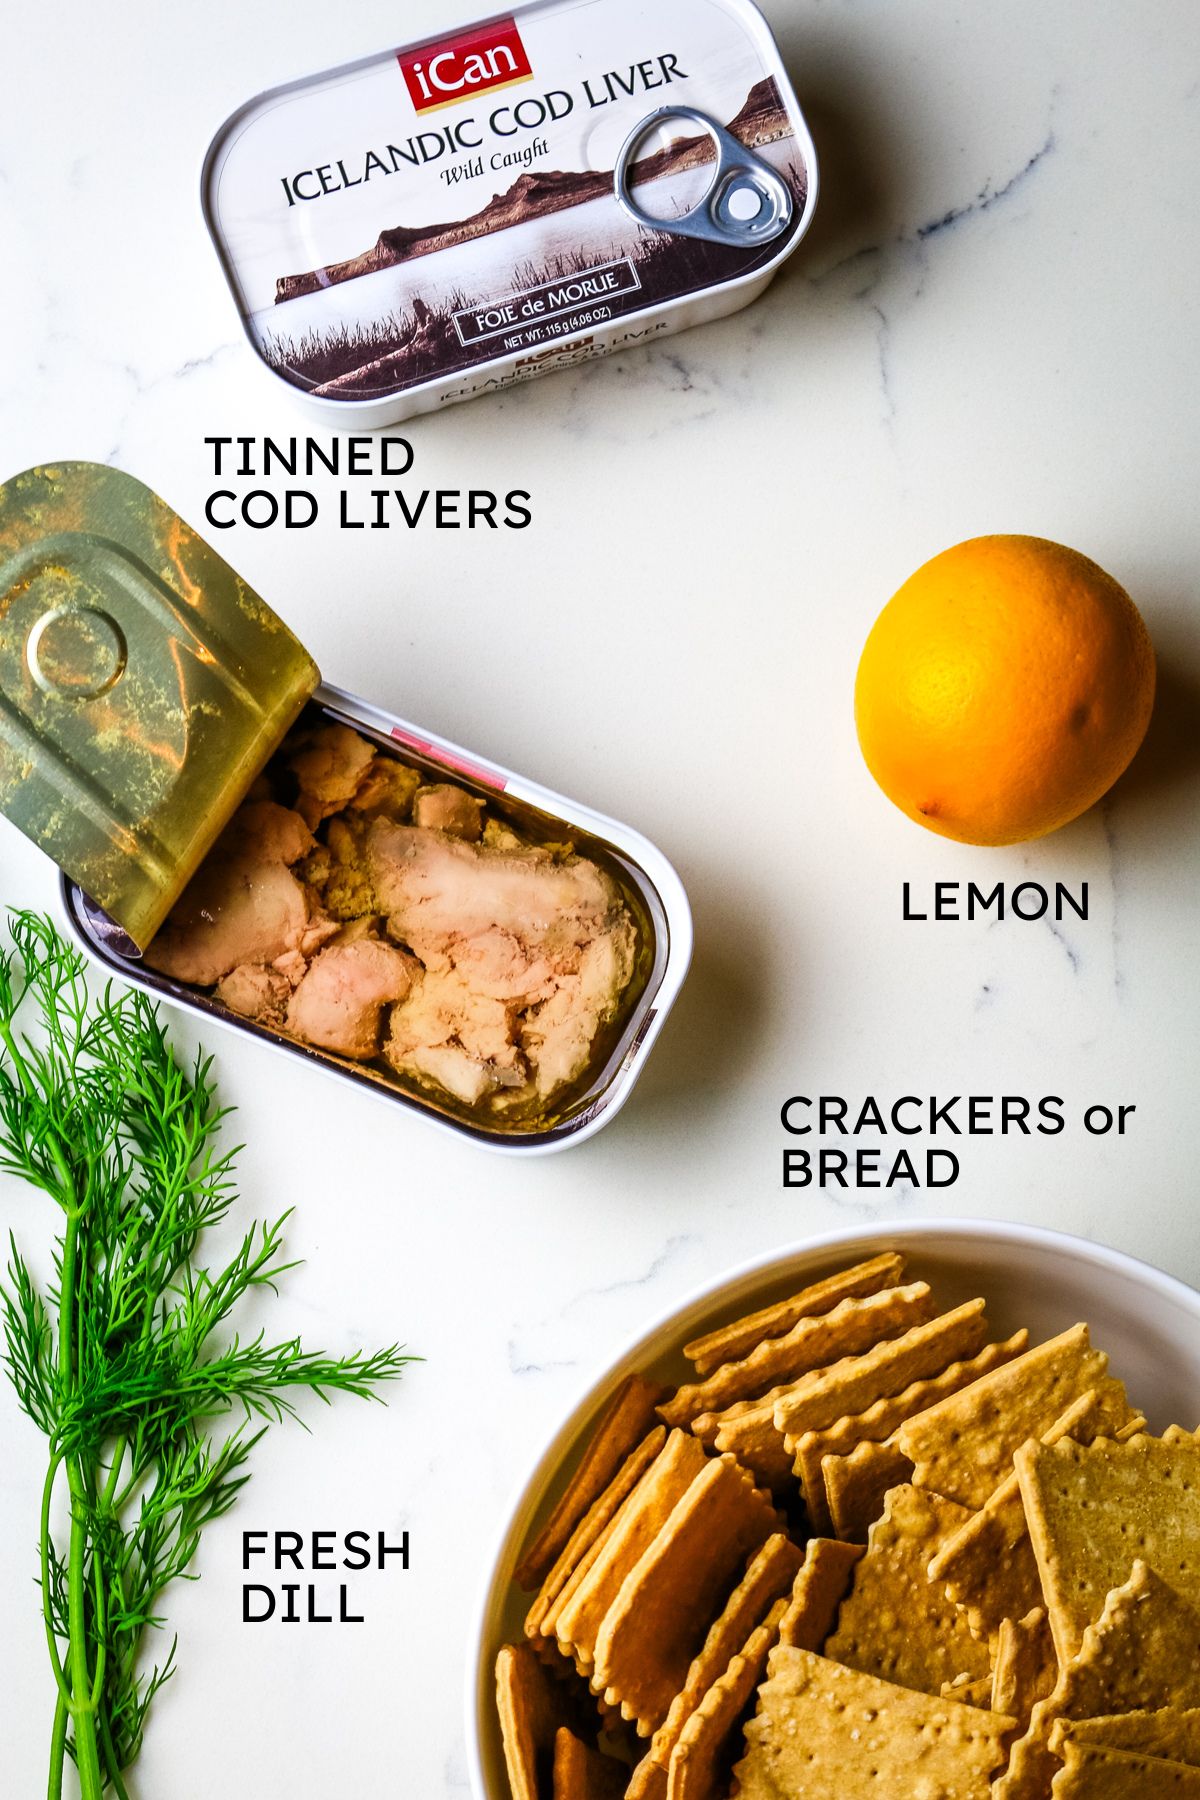 ingredients for cod liver pate including tinned cod livers, lemon, crackers, and dill.